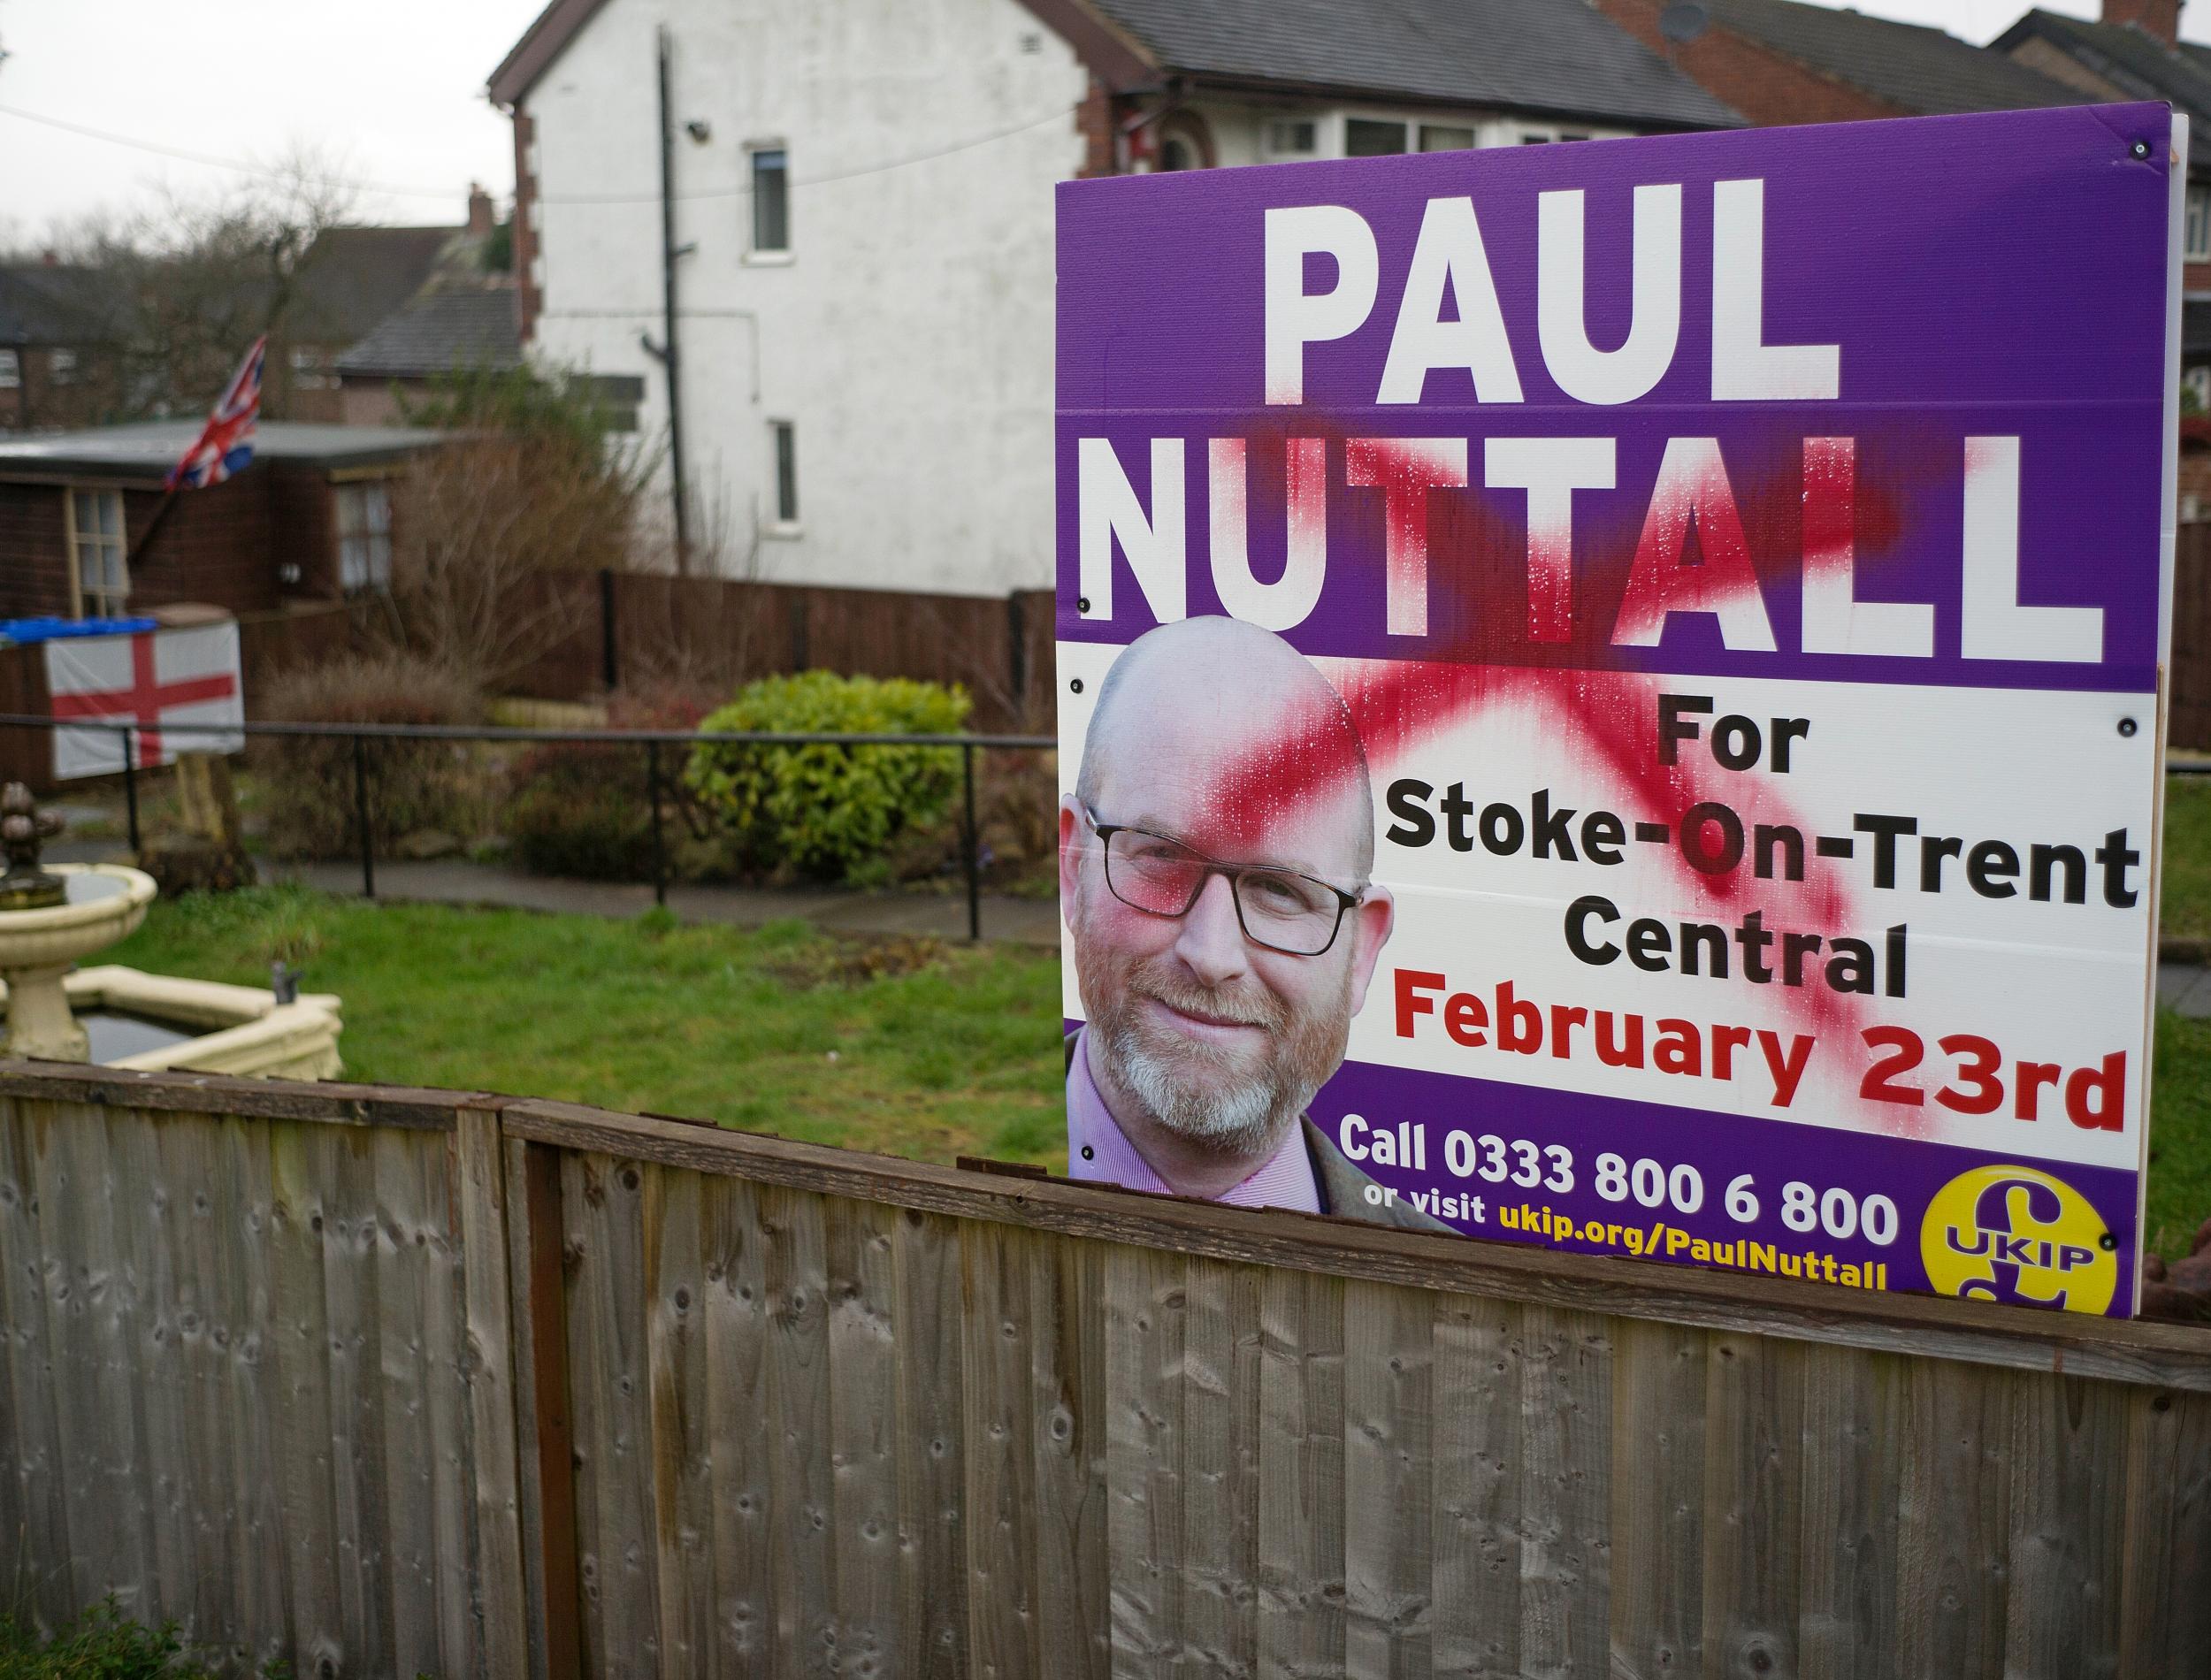 A defaced campaign poster for the parliamentary candidate in Stoke-on-Trent